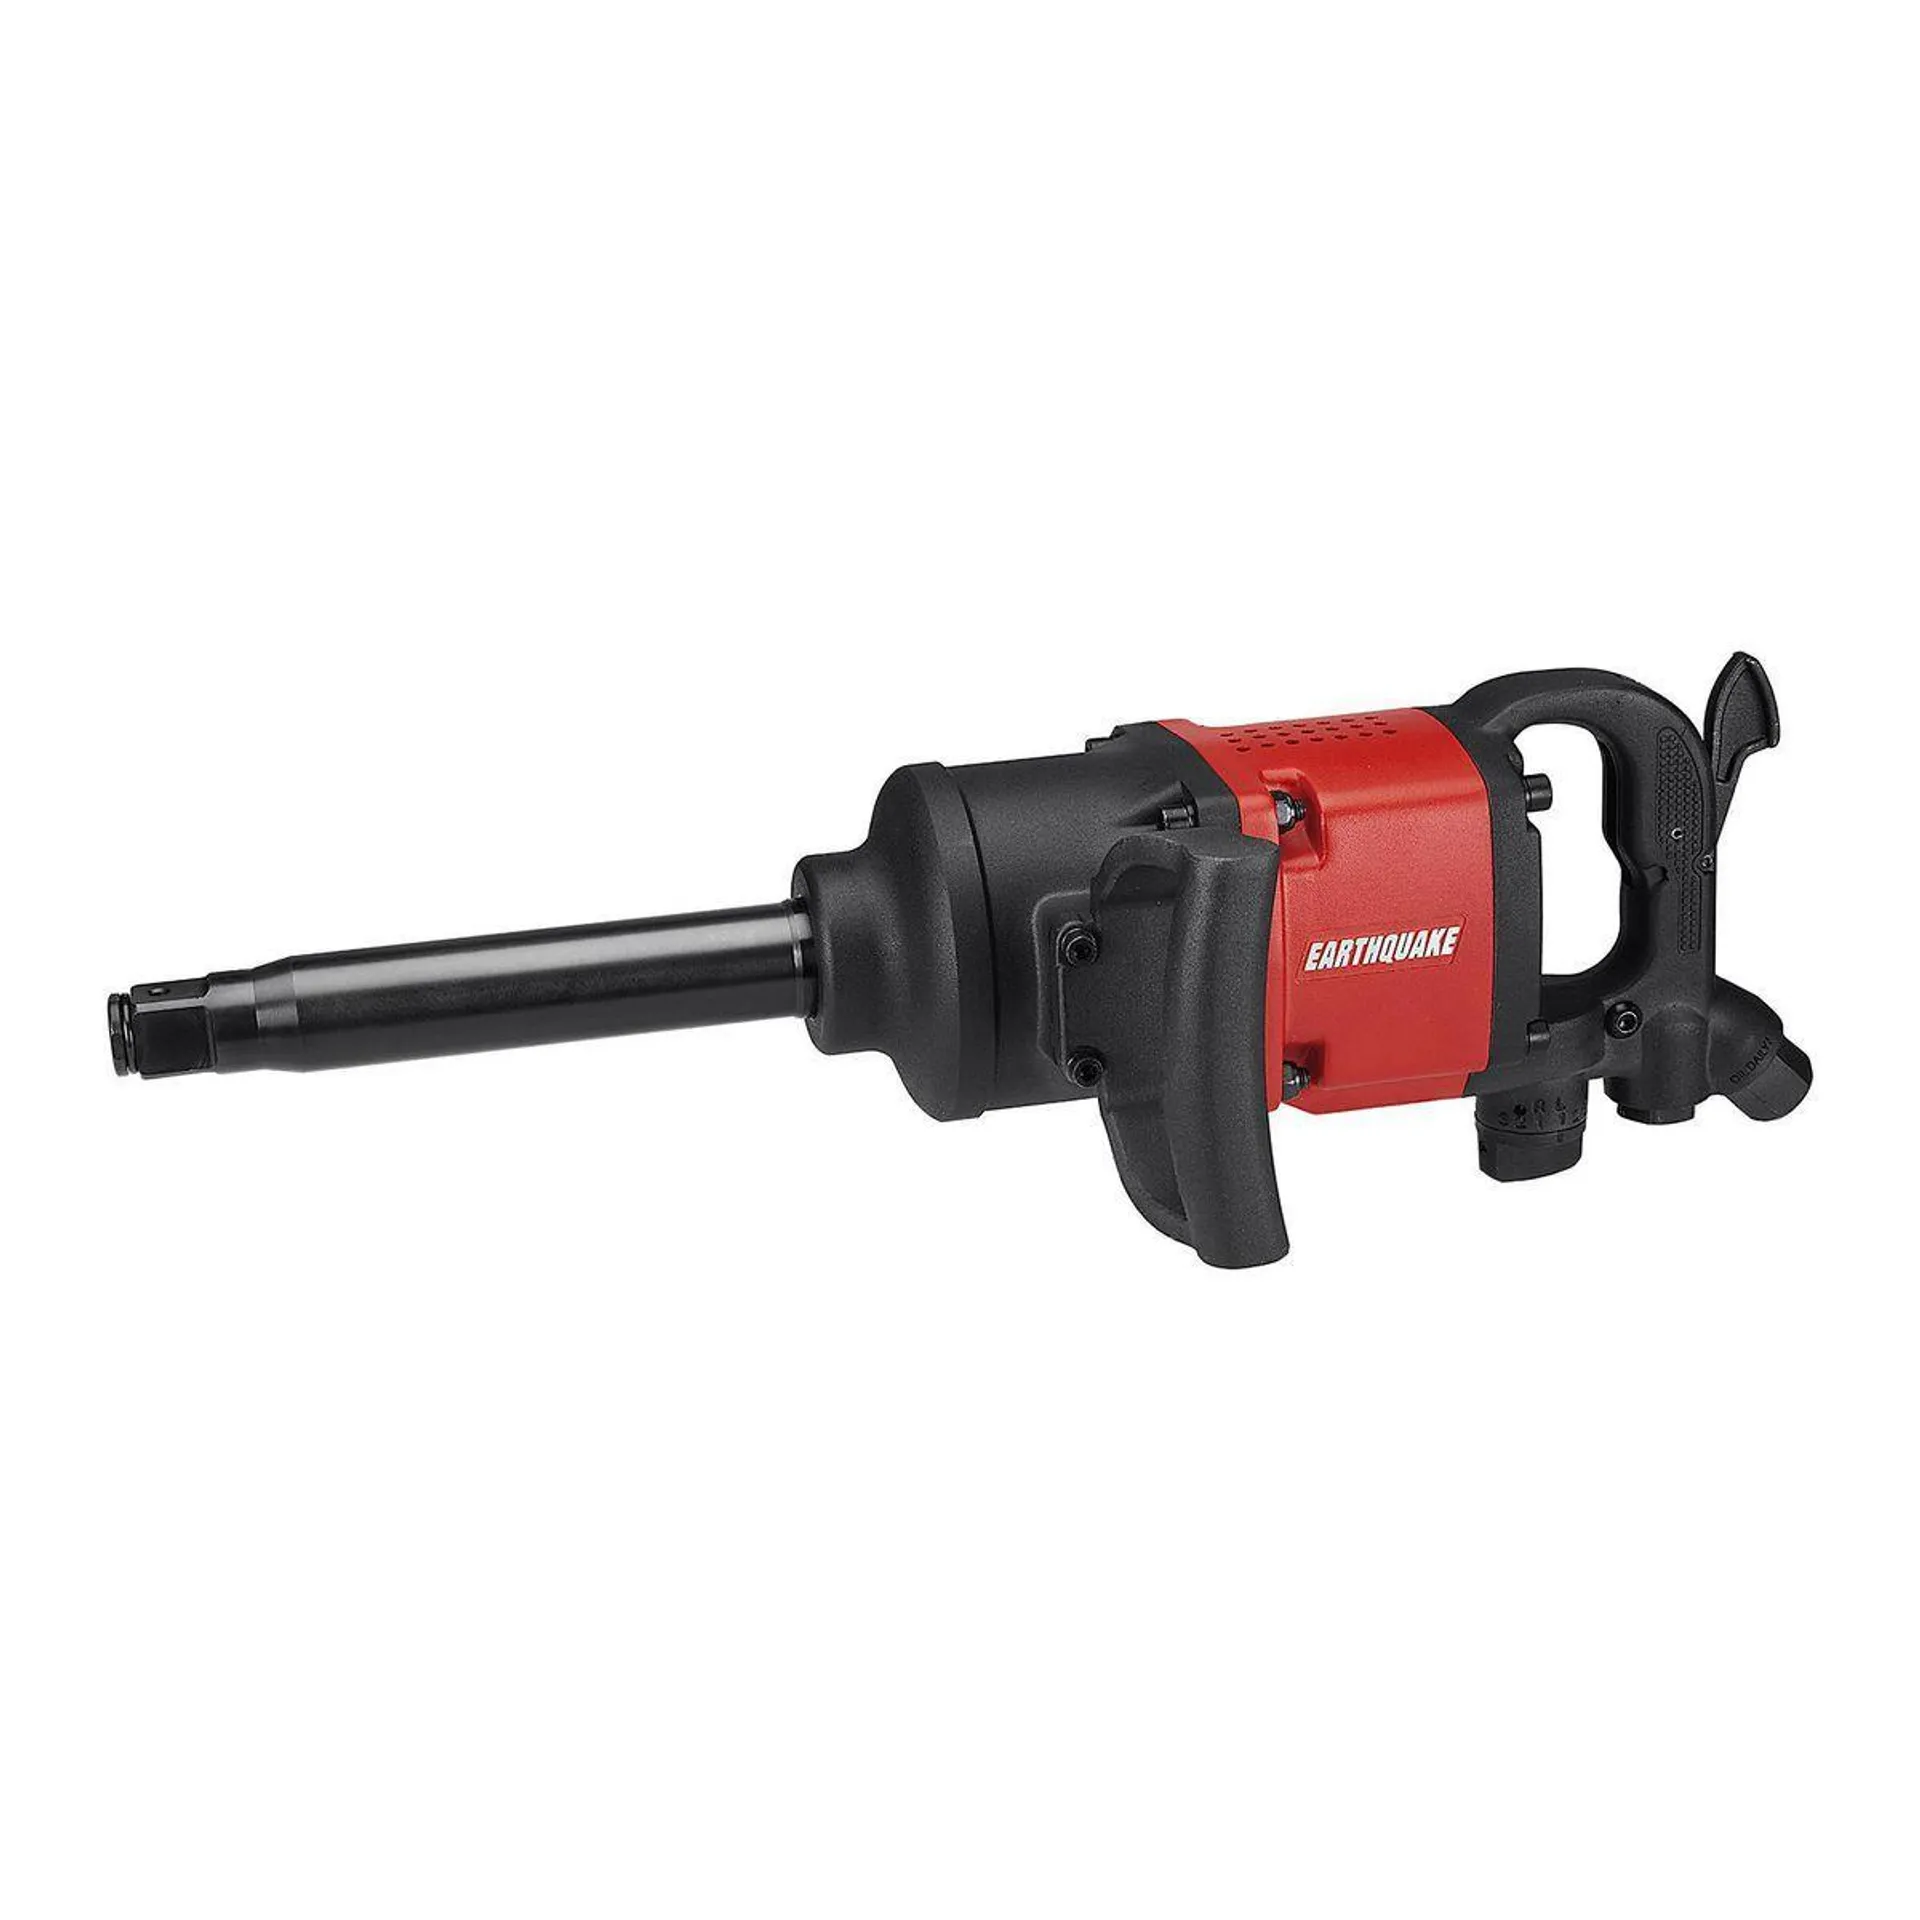 1 in. D-Handle Aluminum Air Impact Wrench, 8 in. Extended Anvil, Pinless, 2500 ft. lbs.